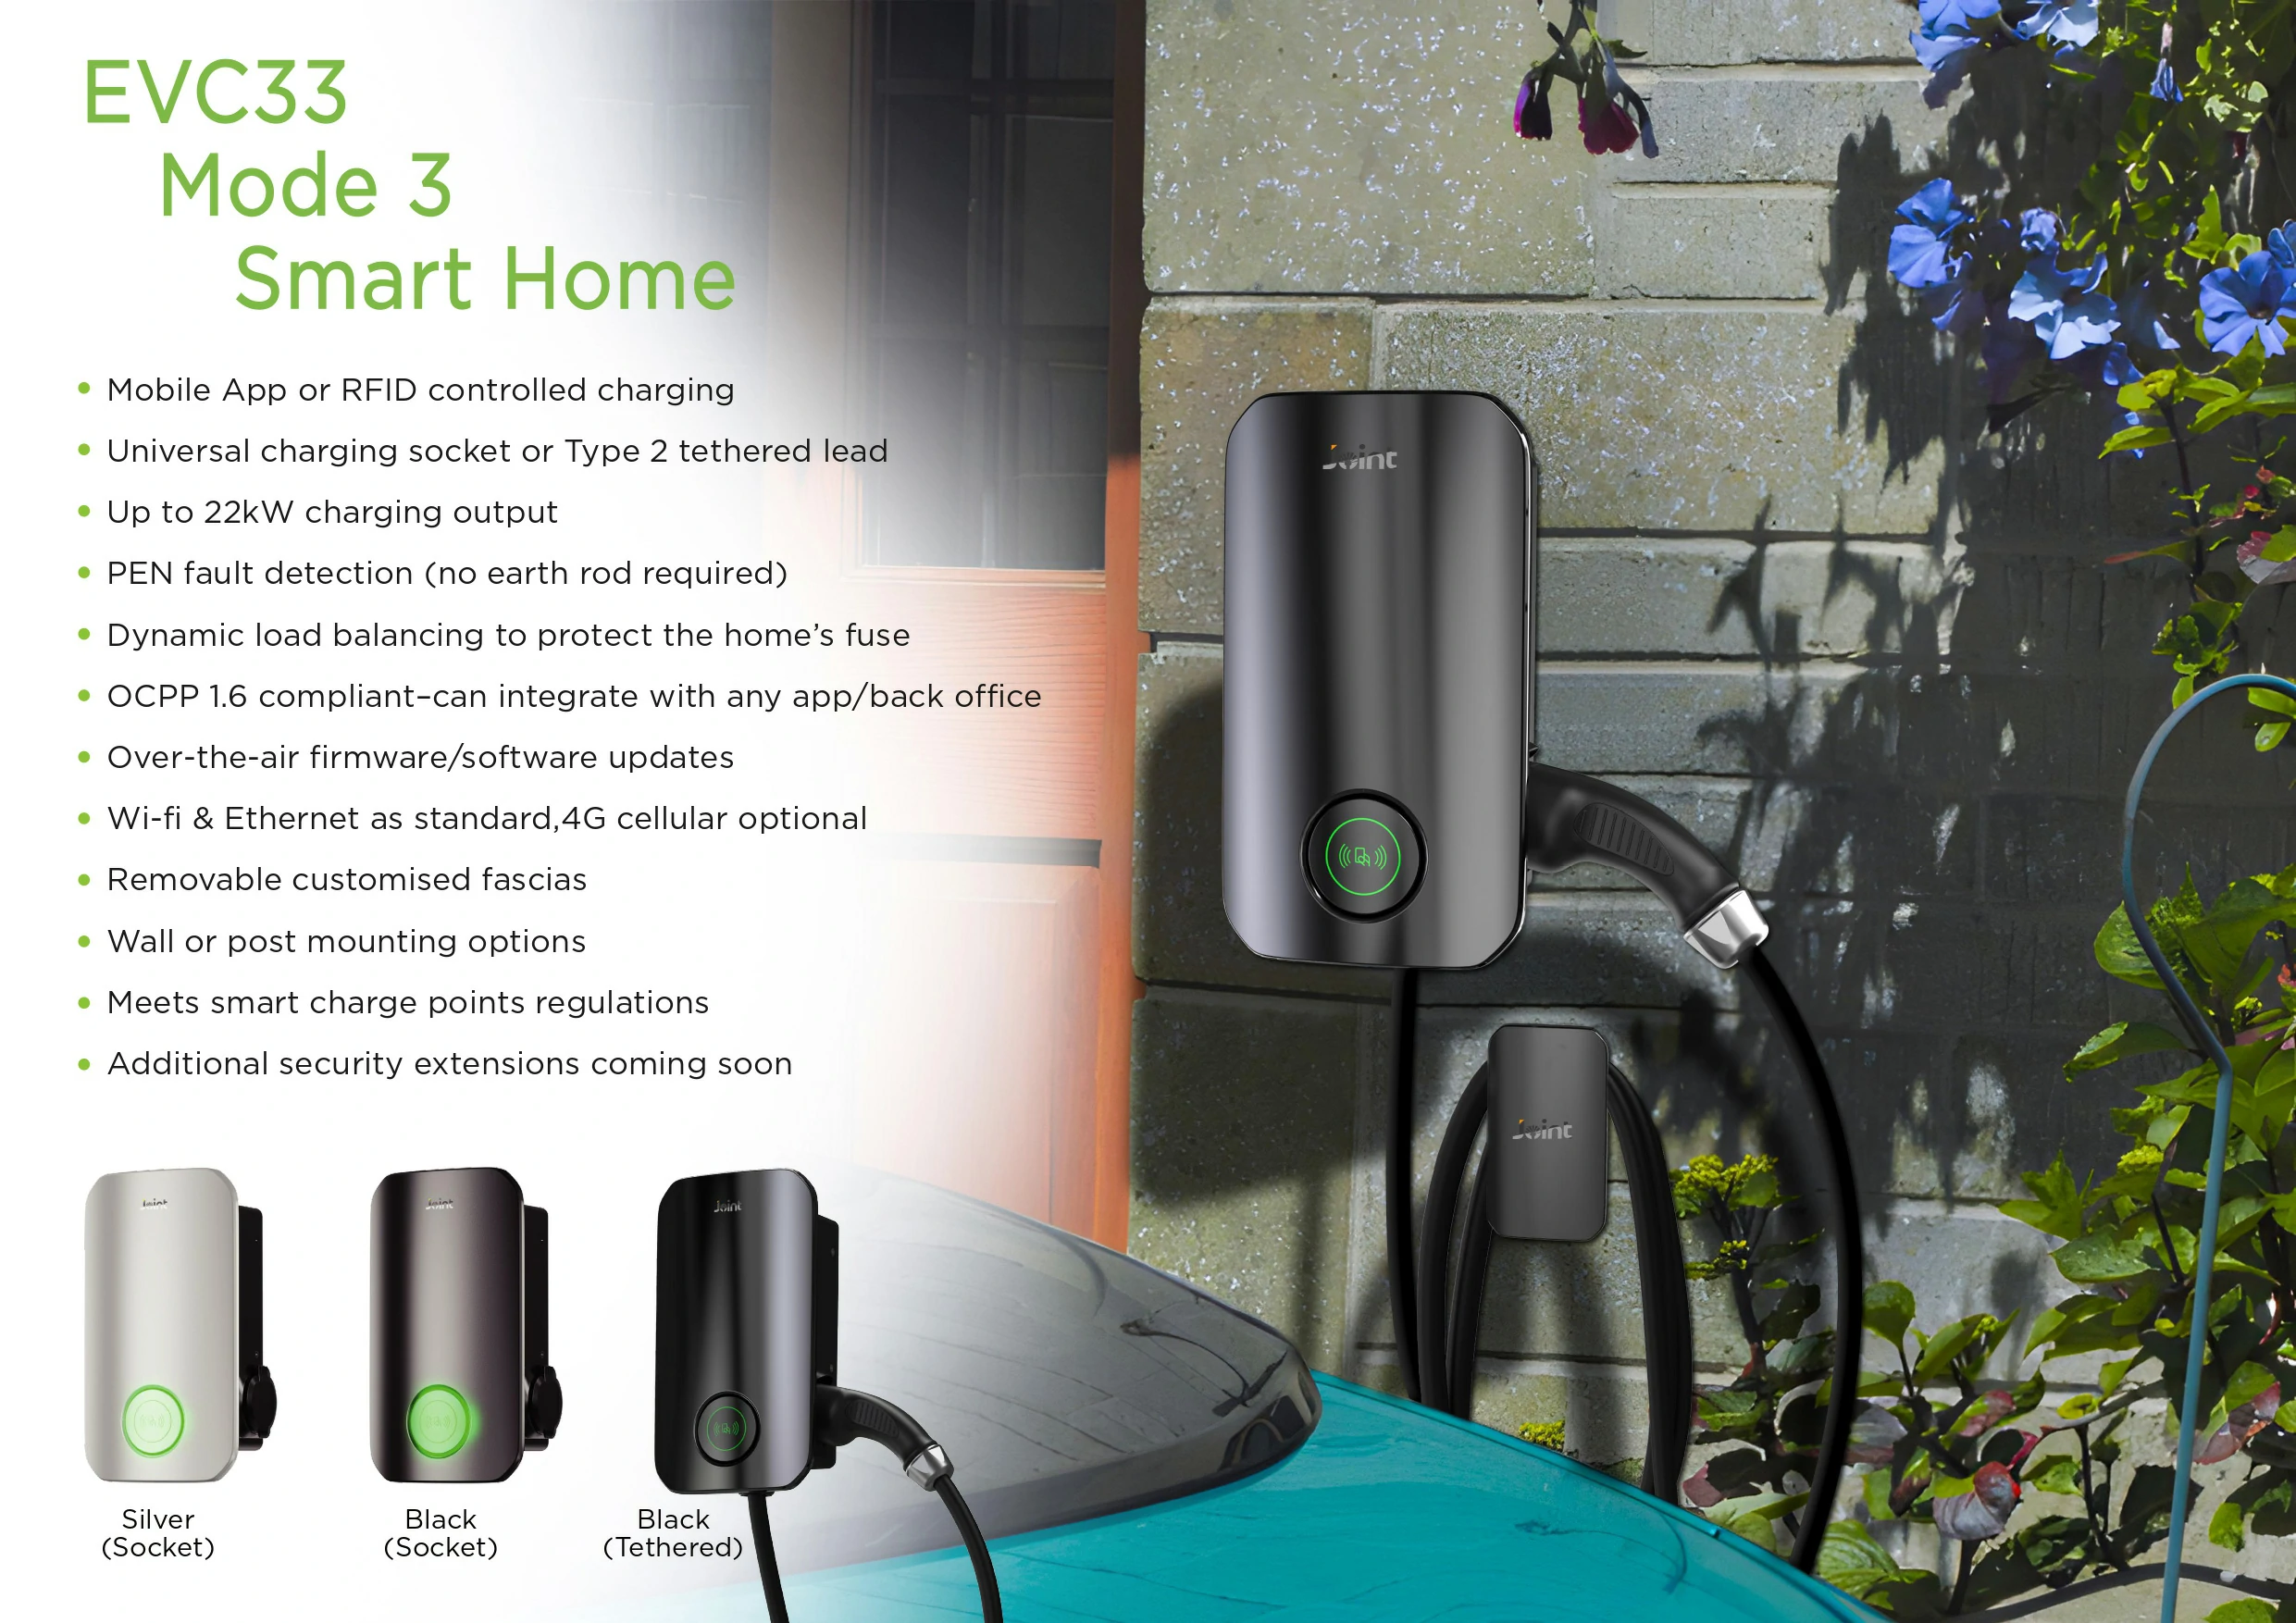 Joint Tech EVC33 smart home charging has some functions,such as dynamic load balancing,PEN-fault detection(no earth rod required).